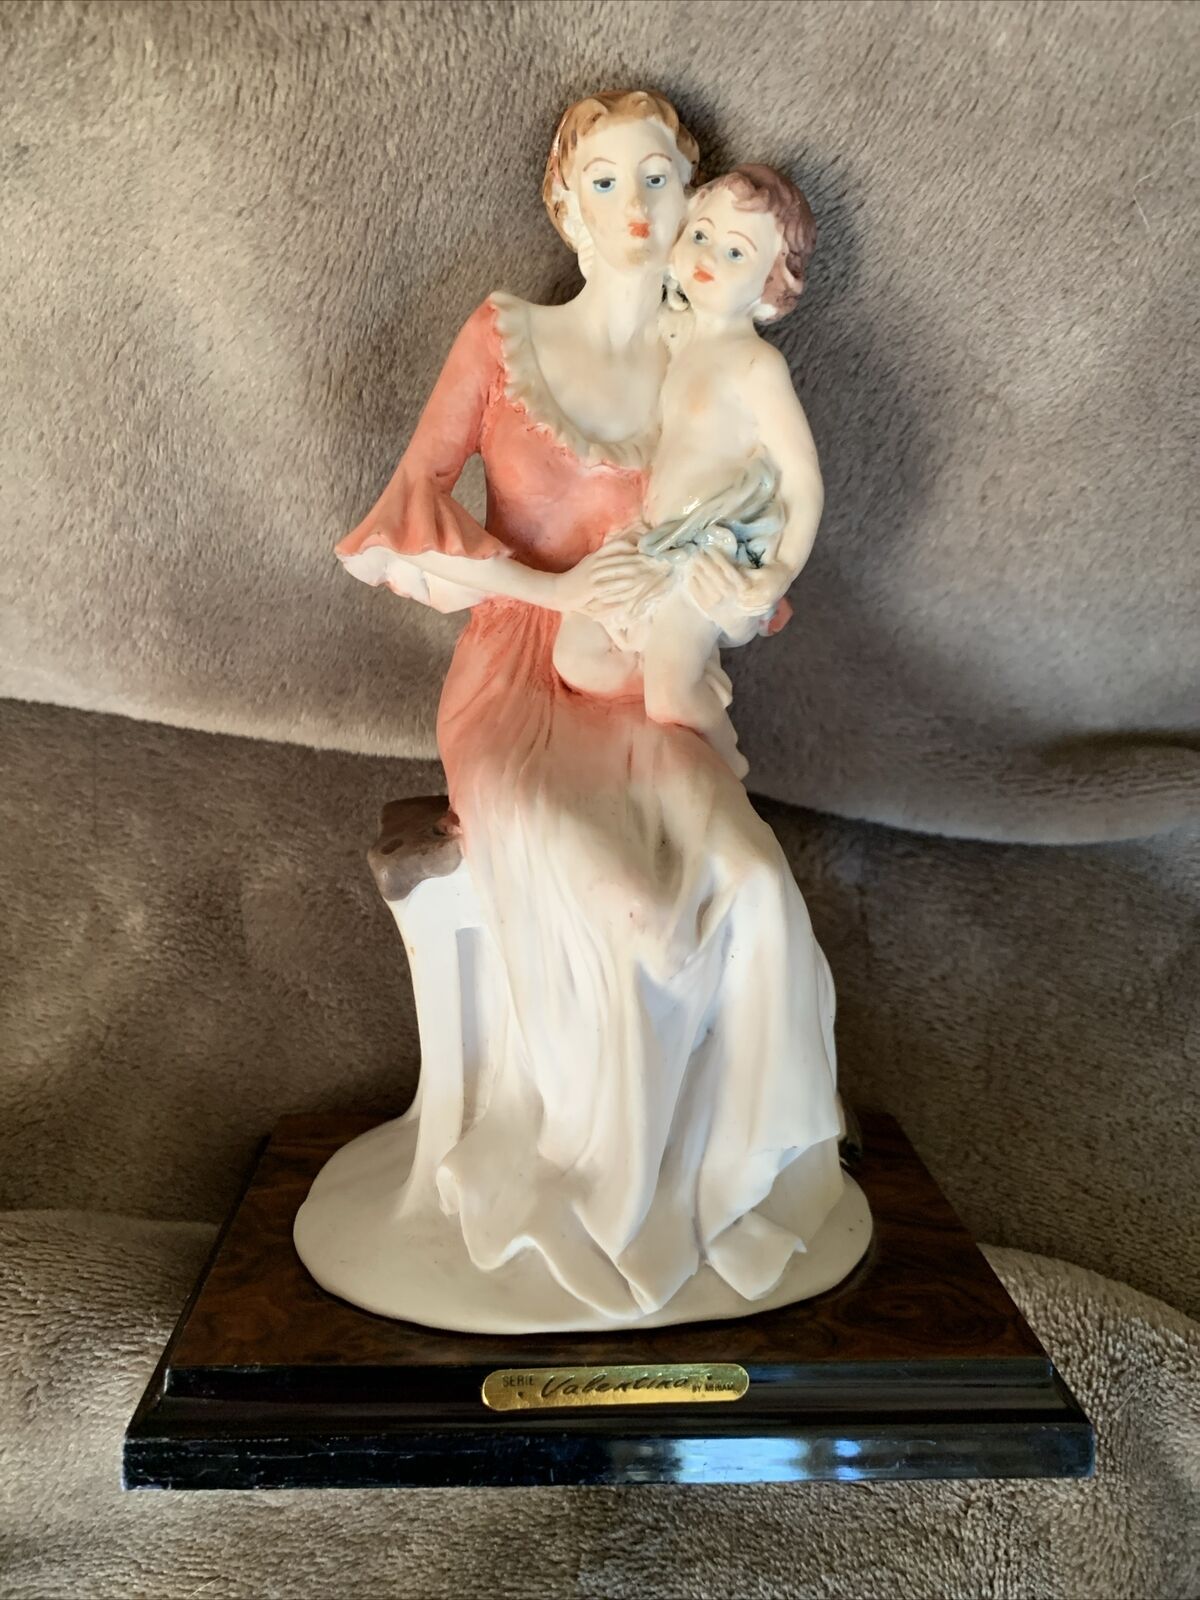 VALENTINO STATUE BY MIRIAM VINTAGE  MOTHER AND CHILD STATUE. 8”. Made In Italy